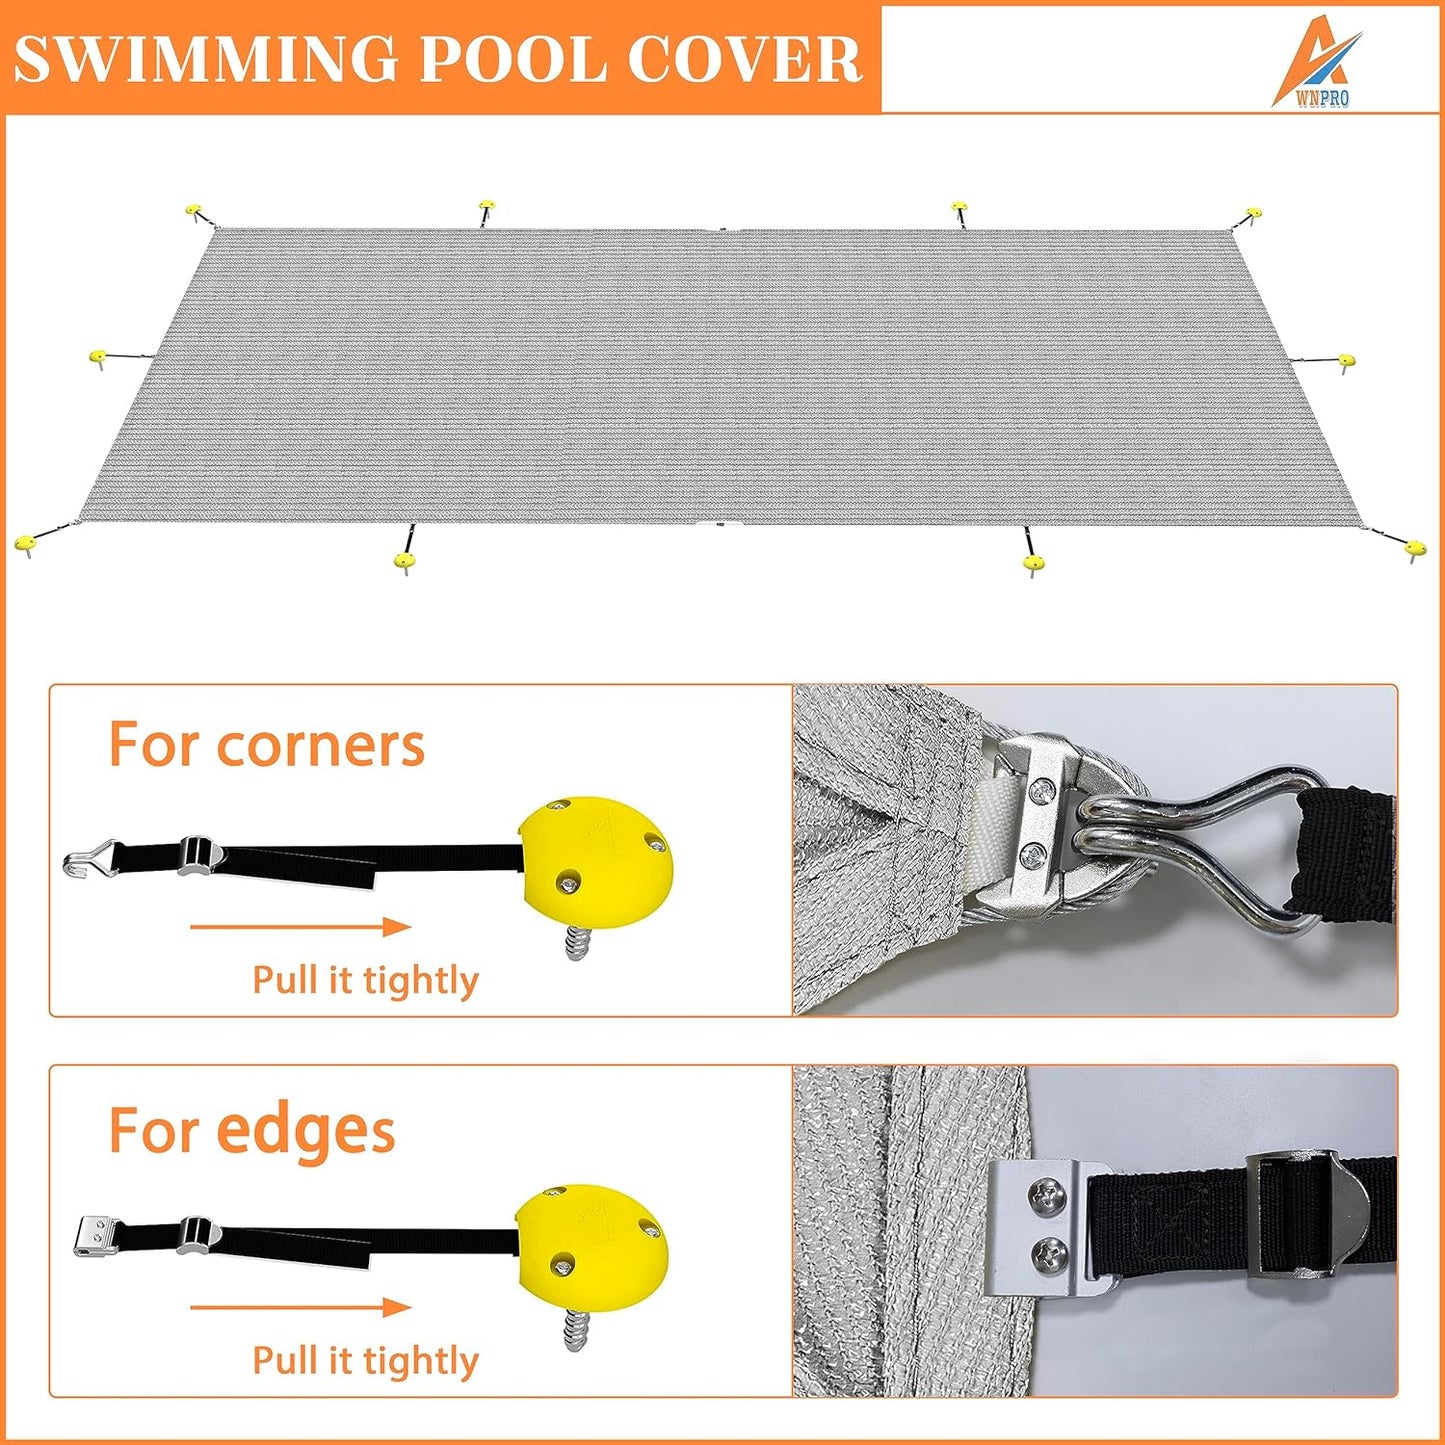 18' x 36' Extra Thick Durable Rectangular Inground Pool Covers Inground Safety Pool Covers for Swimming Pools (Light Gray)Pool Cover